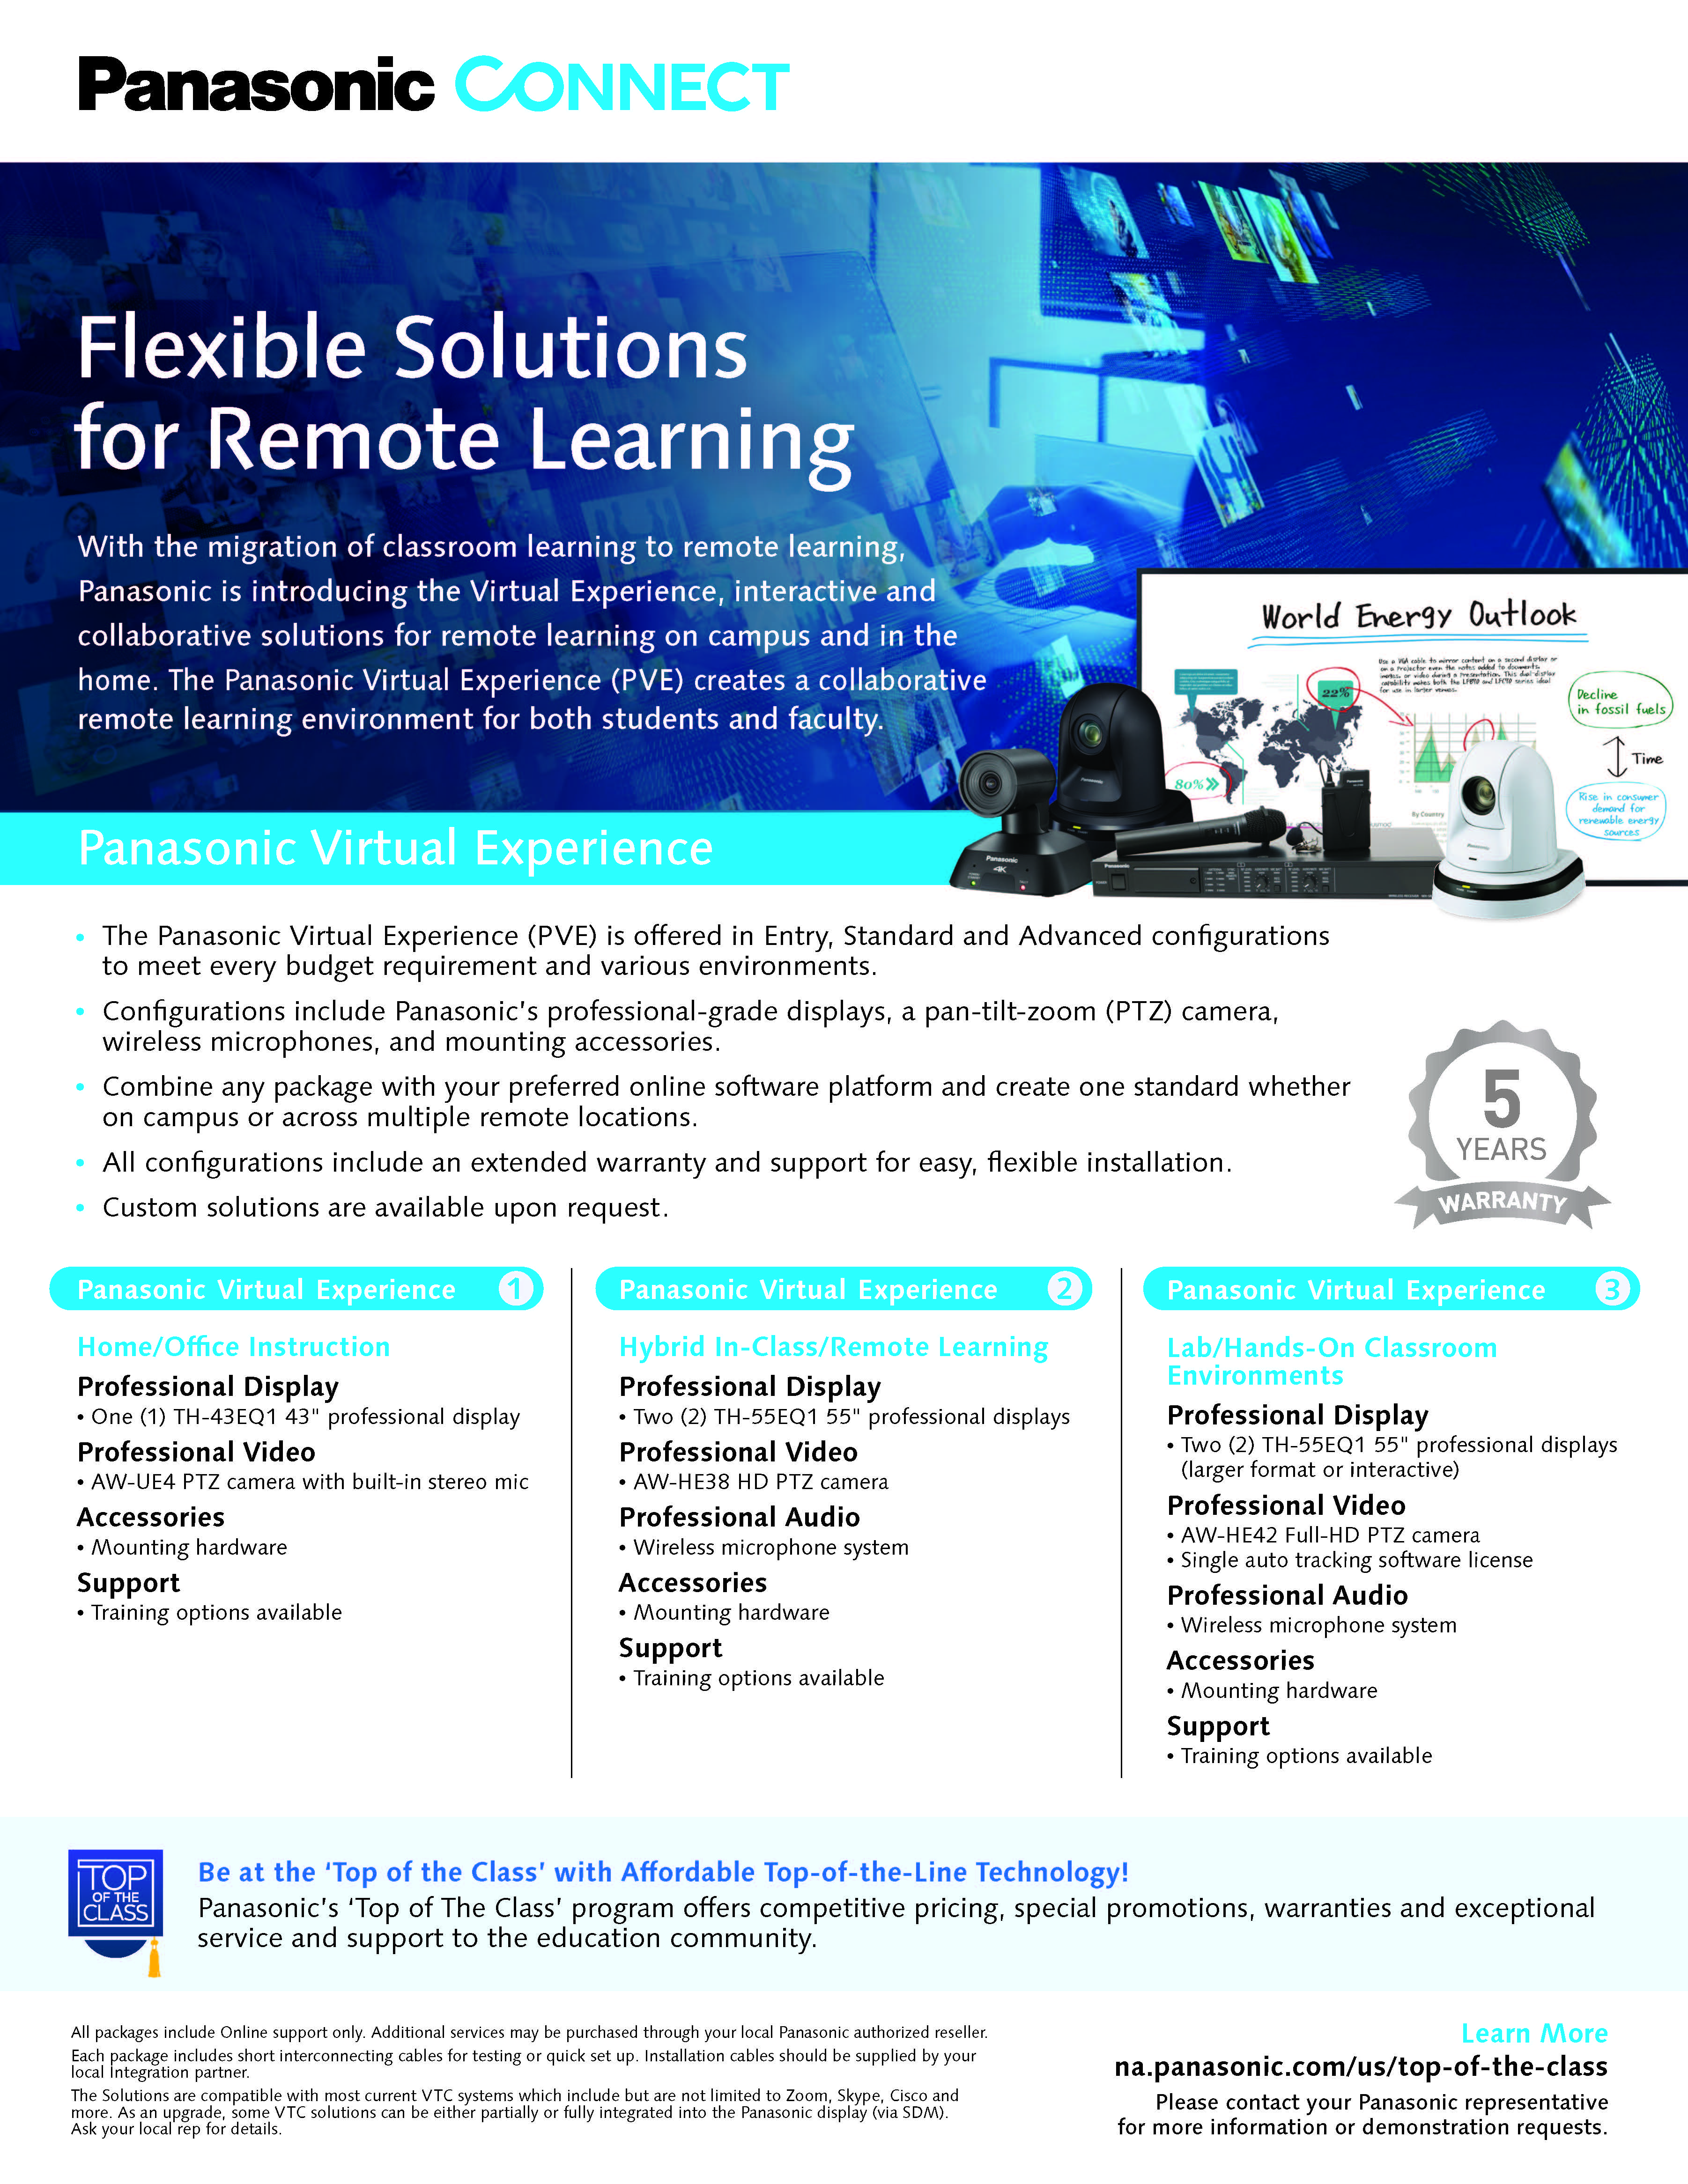 FNL_CONNECT_PIVS_Flexible Solutions for Remote Learning Flyer